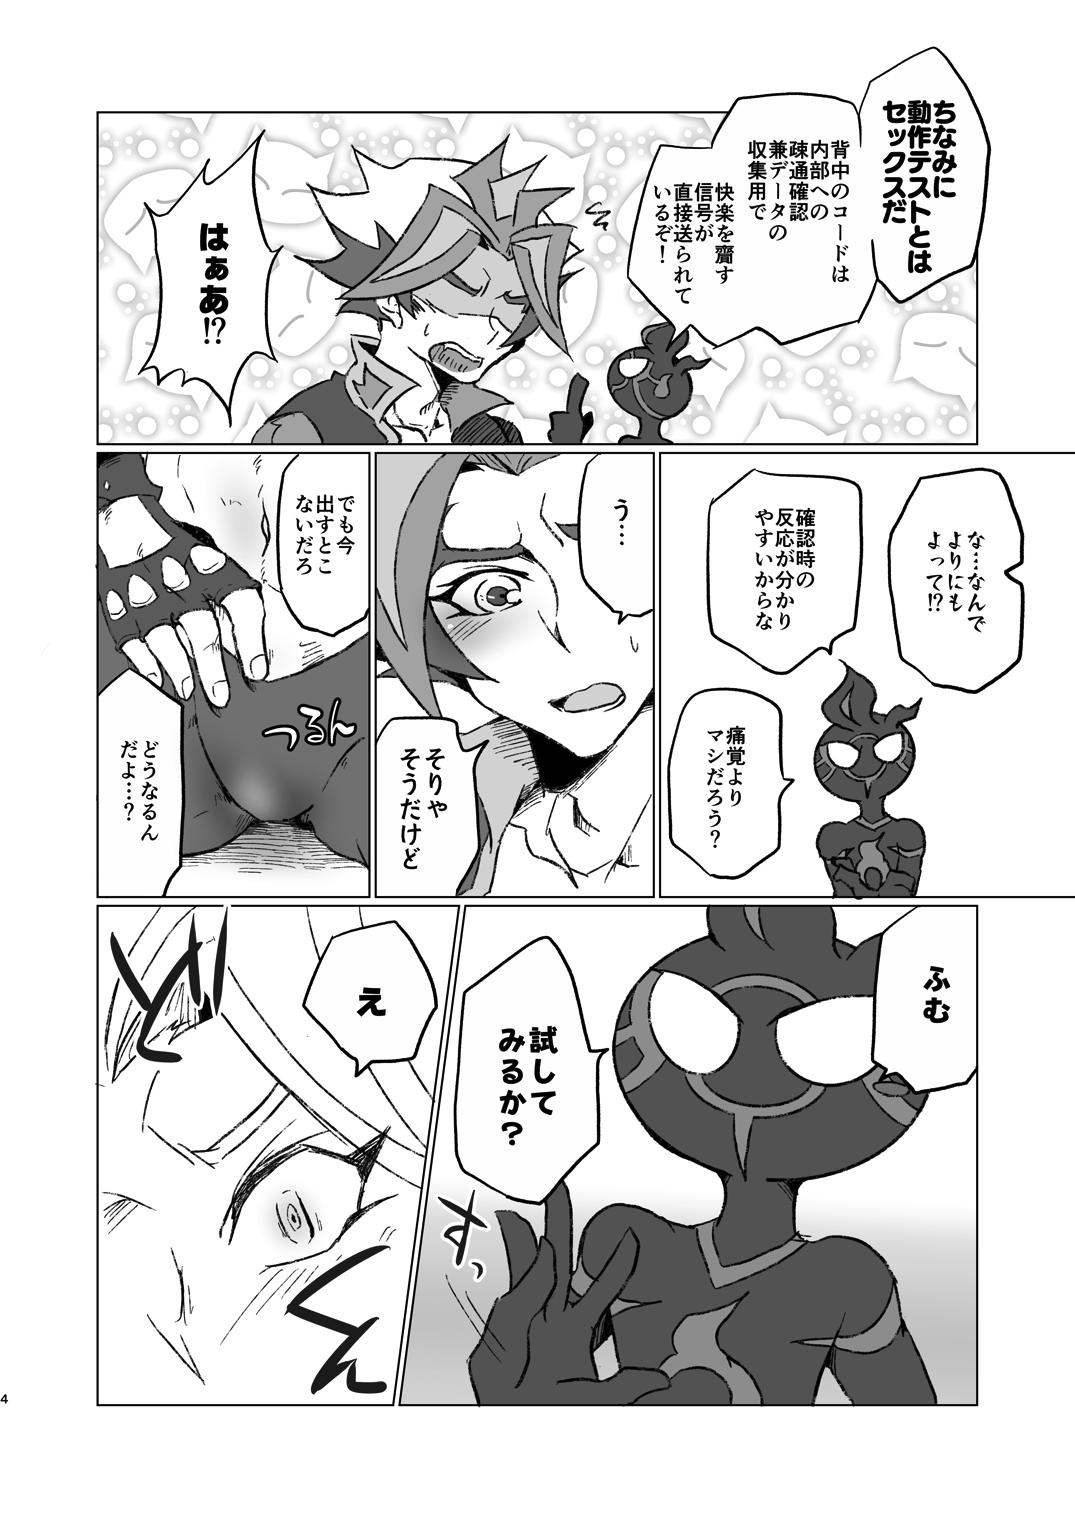 Stepsis A little bit further - Yu-gi-oh vrains Outdoor - Page 3